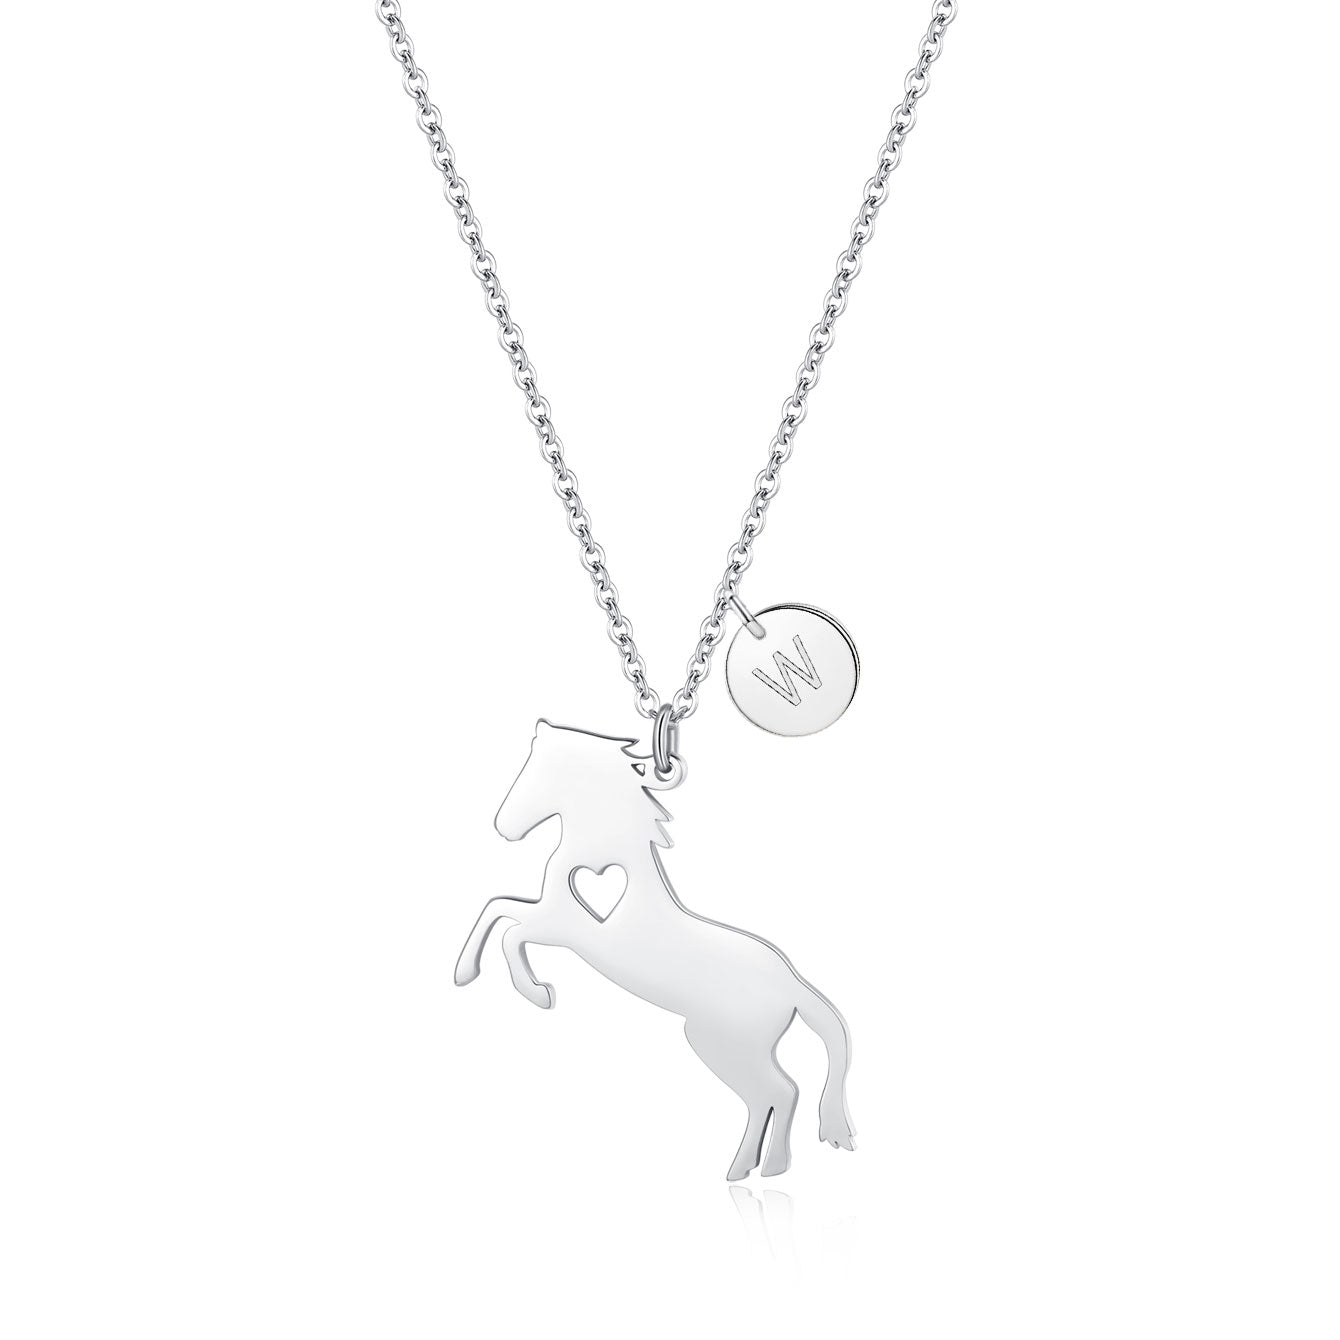 Charming Stainless Steel Horse Necklace - Horse Pendant with 26 Initials, Ideal Gift for Girls, Women, and Horse Enthusiasts of All Ages